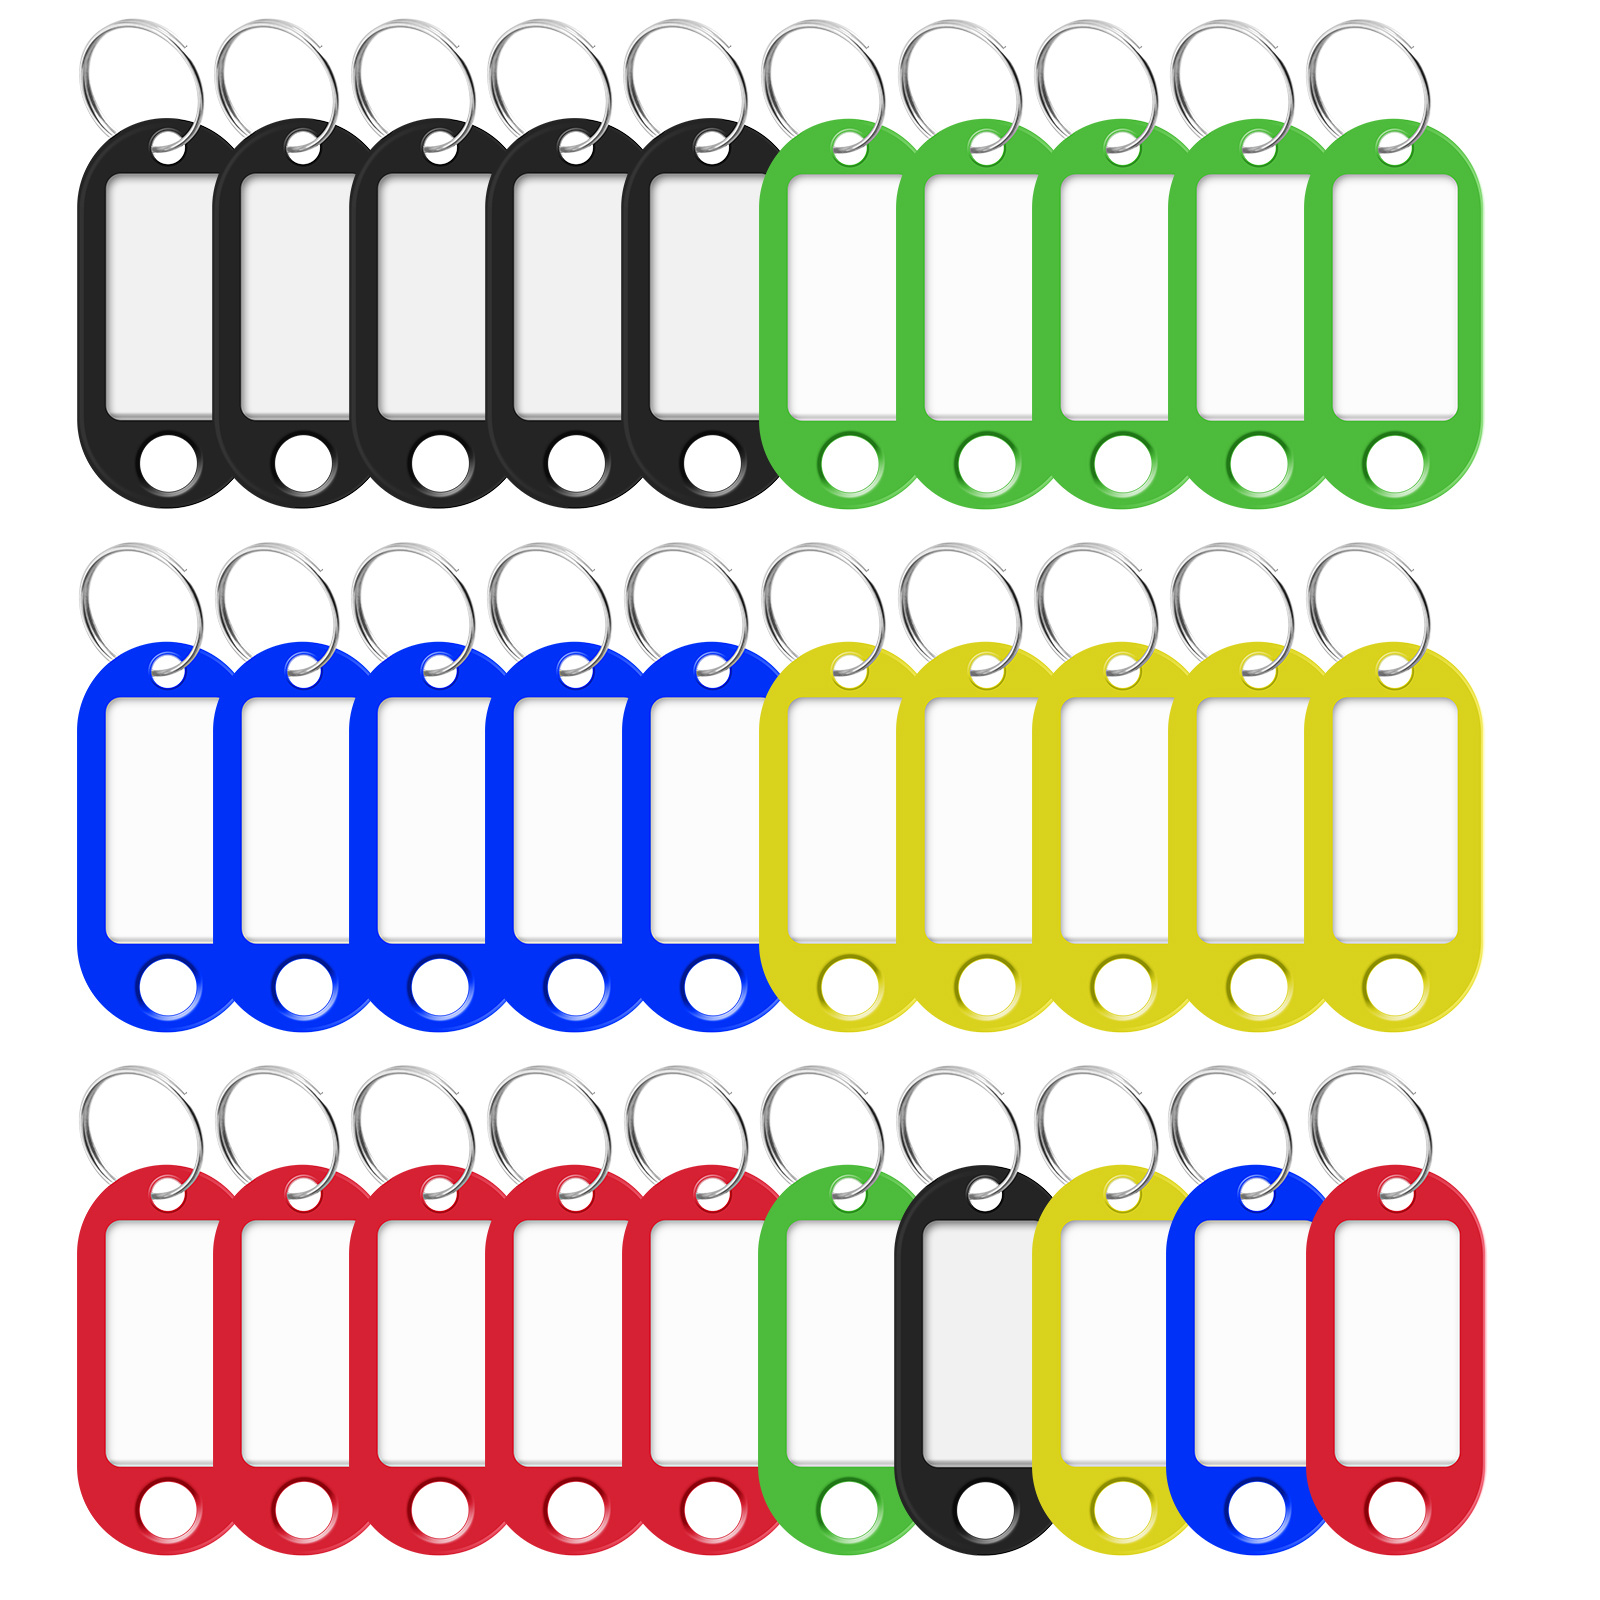 50 pack Durable Key Tags with Labels and Split Rings - Perfect for Labeling  Keys, Pets, Luggage, and More - Available in 5 Colors